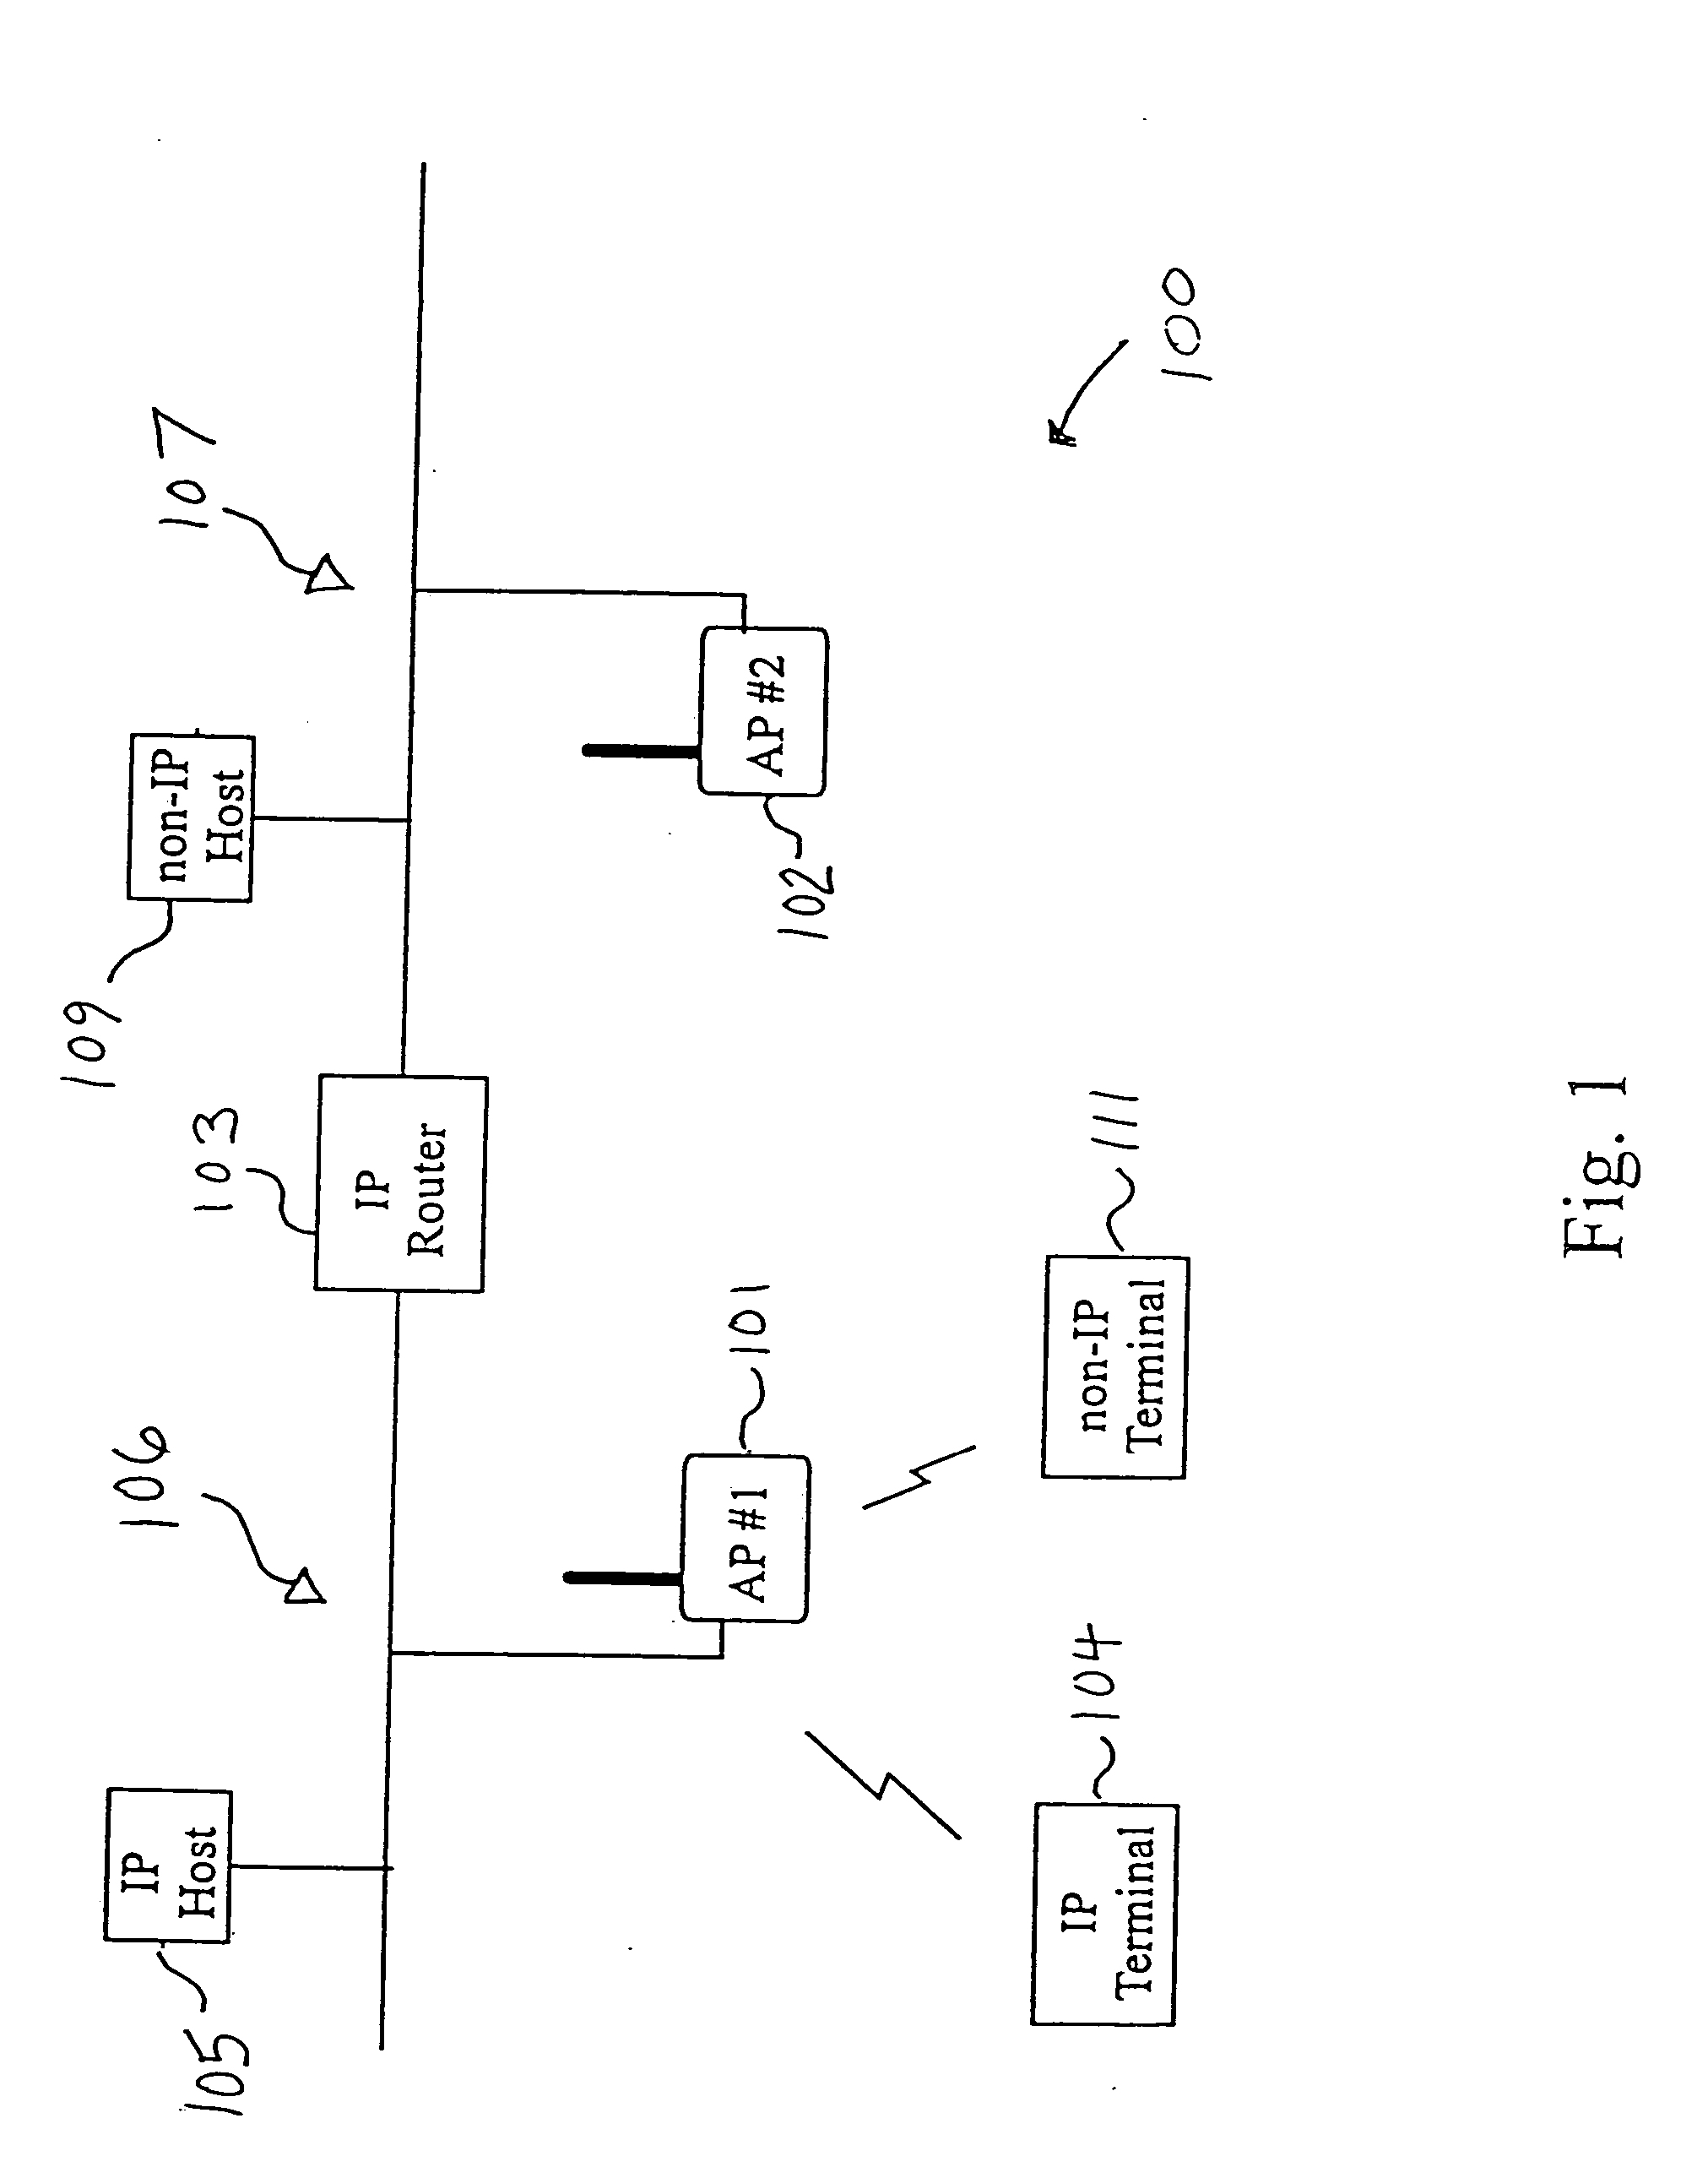 Enhanced mobility and address resolution in a wireless premises based network